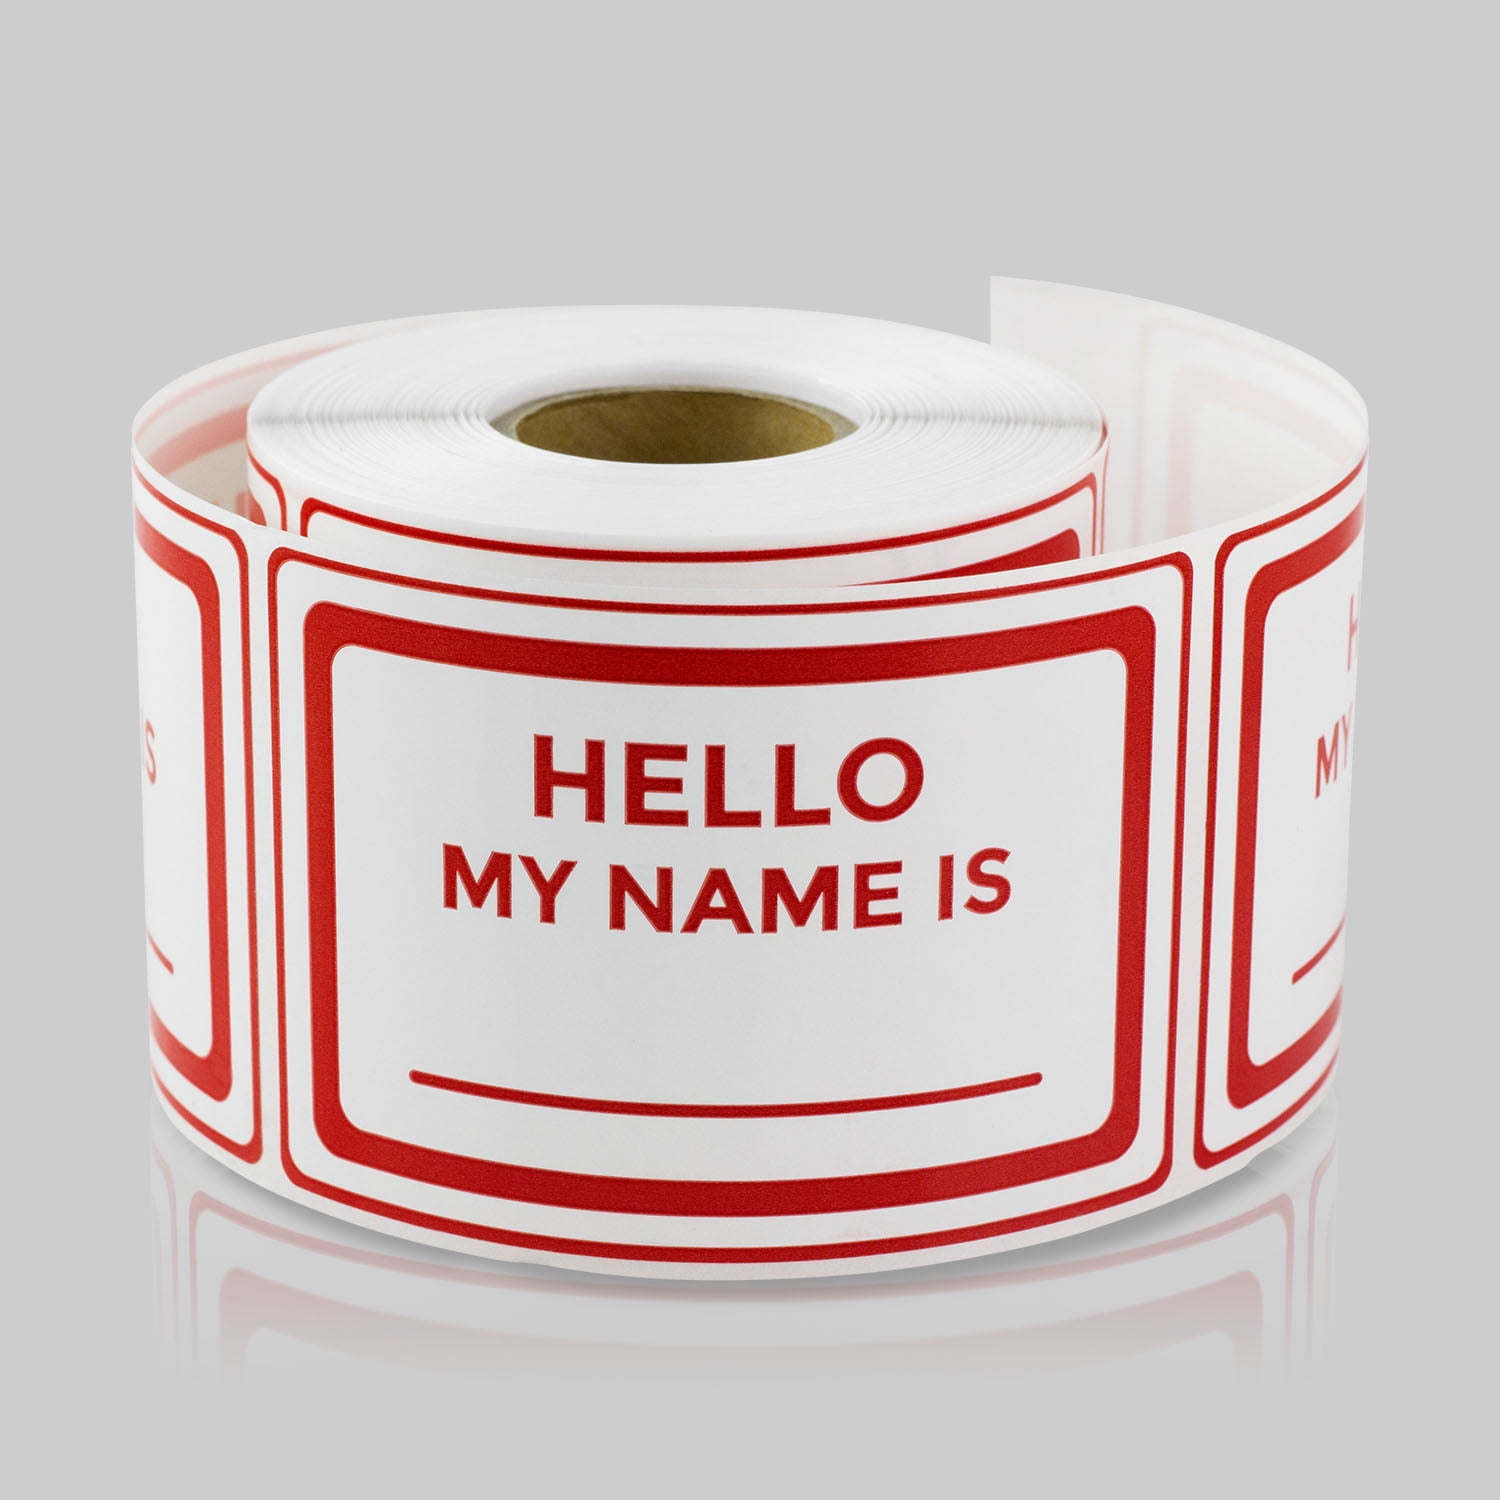 1000 RED "HELLO MY NAME IS" NAME TAGS LABELS BADGES STICKERS PEEL STICK ADHESIVE 